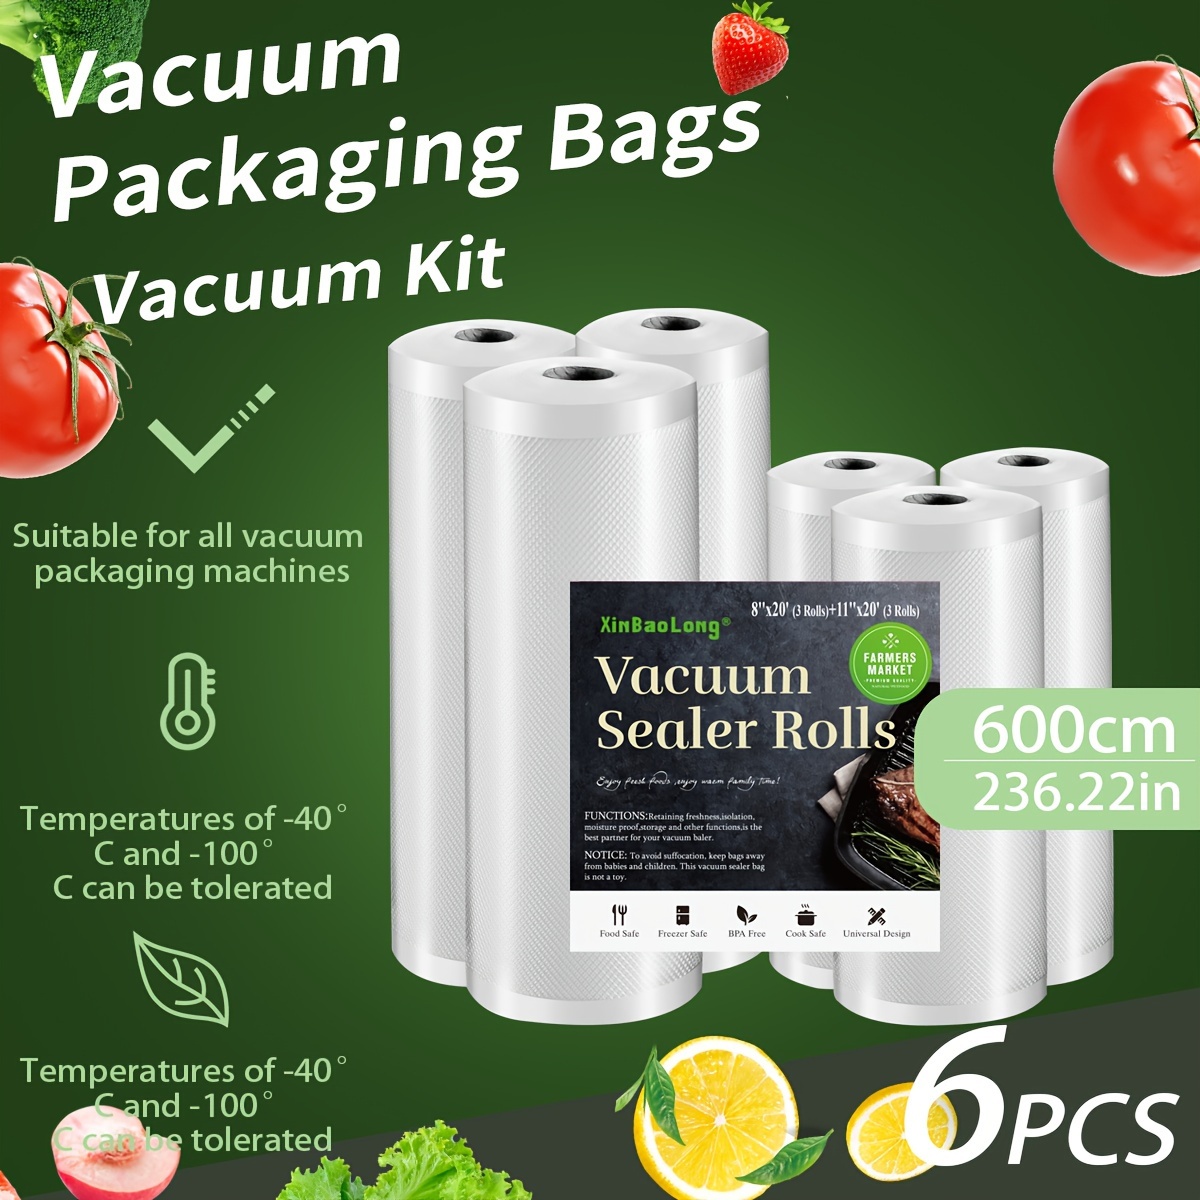 

6pcs Vacuum Sealed Bags, Food Vacuum Storage Bags, Free Of Bisphenol A, Used For Meat, Fruits, Grains, And Vegetables, Kitchen Organizers And Storage, Kitchen Accessories